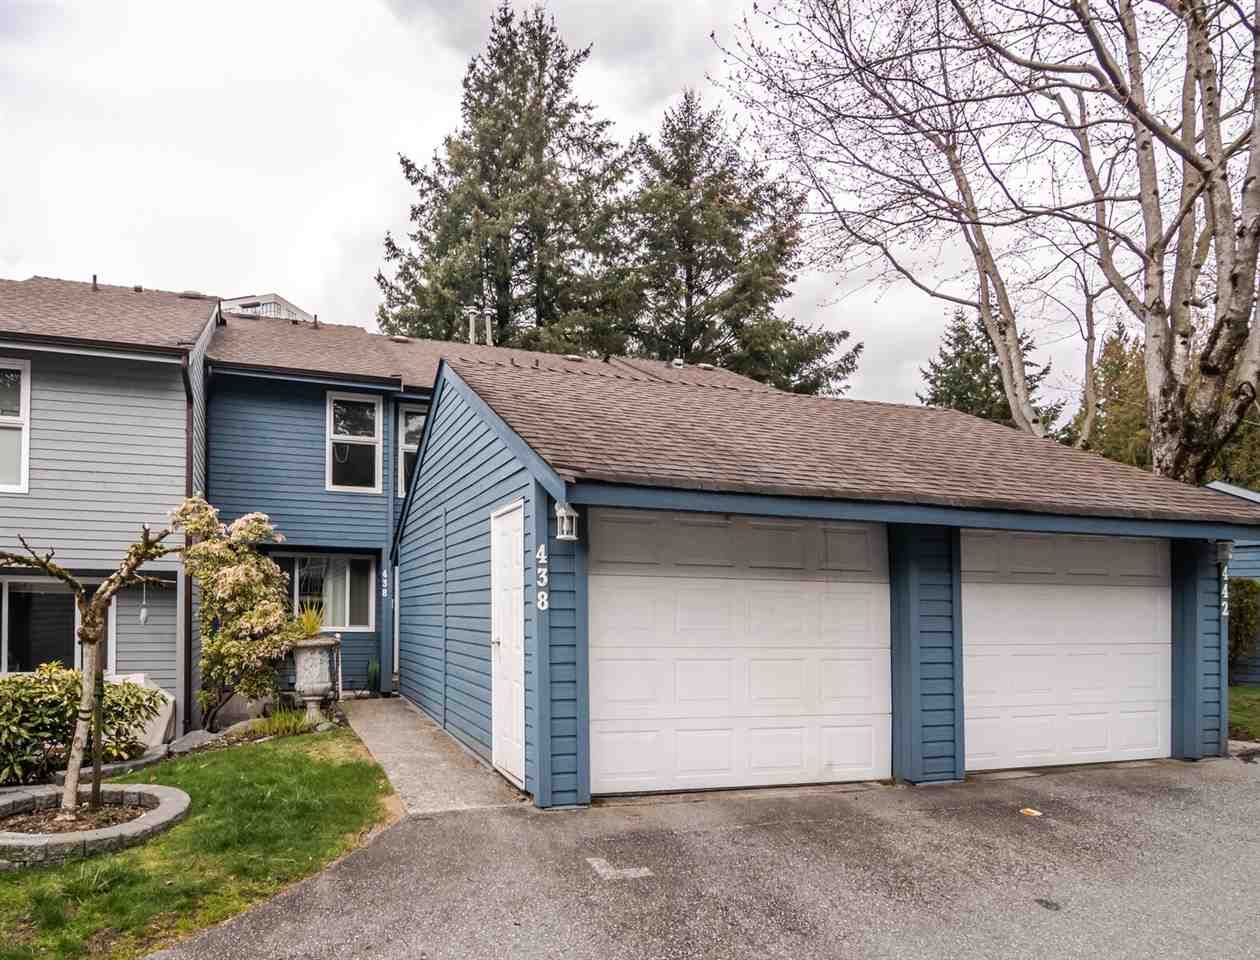 Main Photo: 438 CARLSEN PLACE in : North Shore Pt Moody Townhouse for sale : MLS®# R2557226